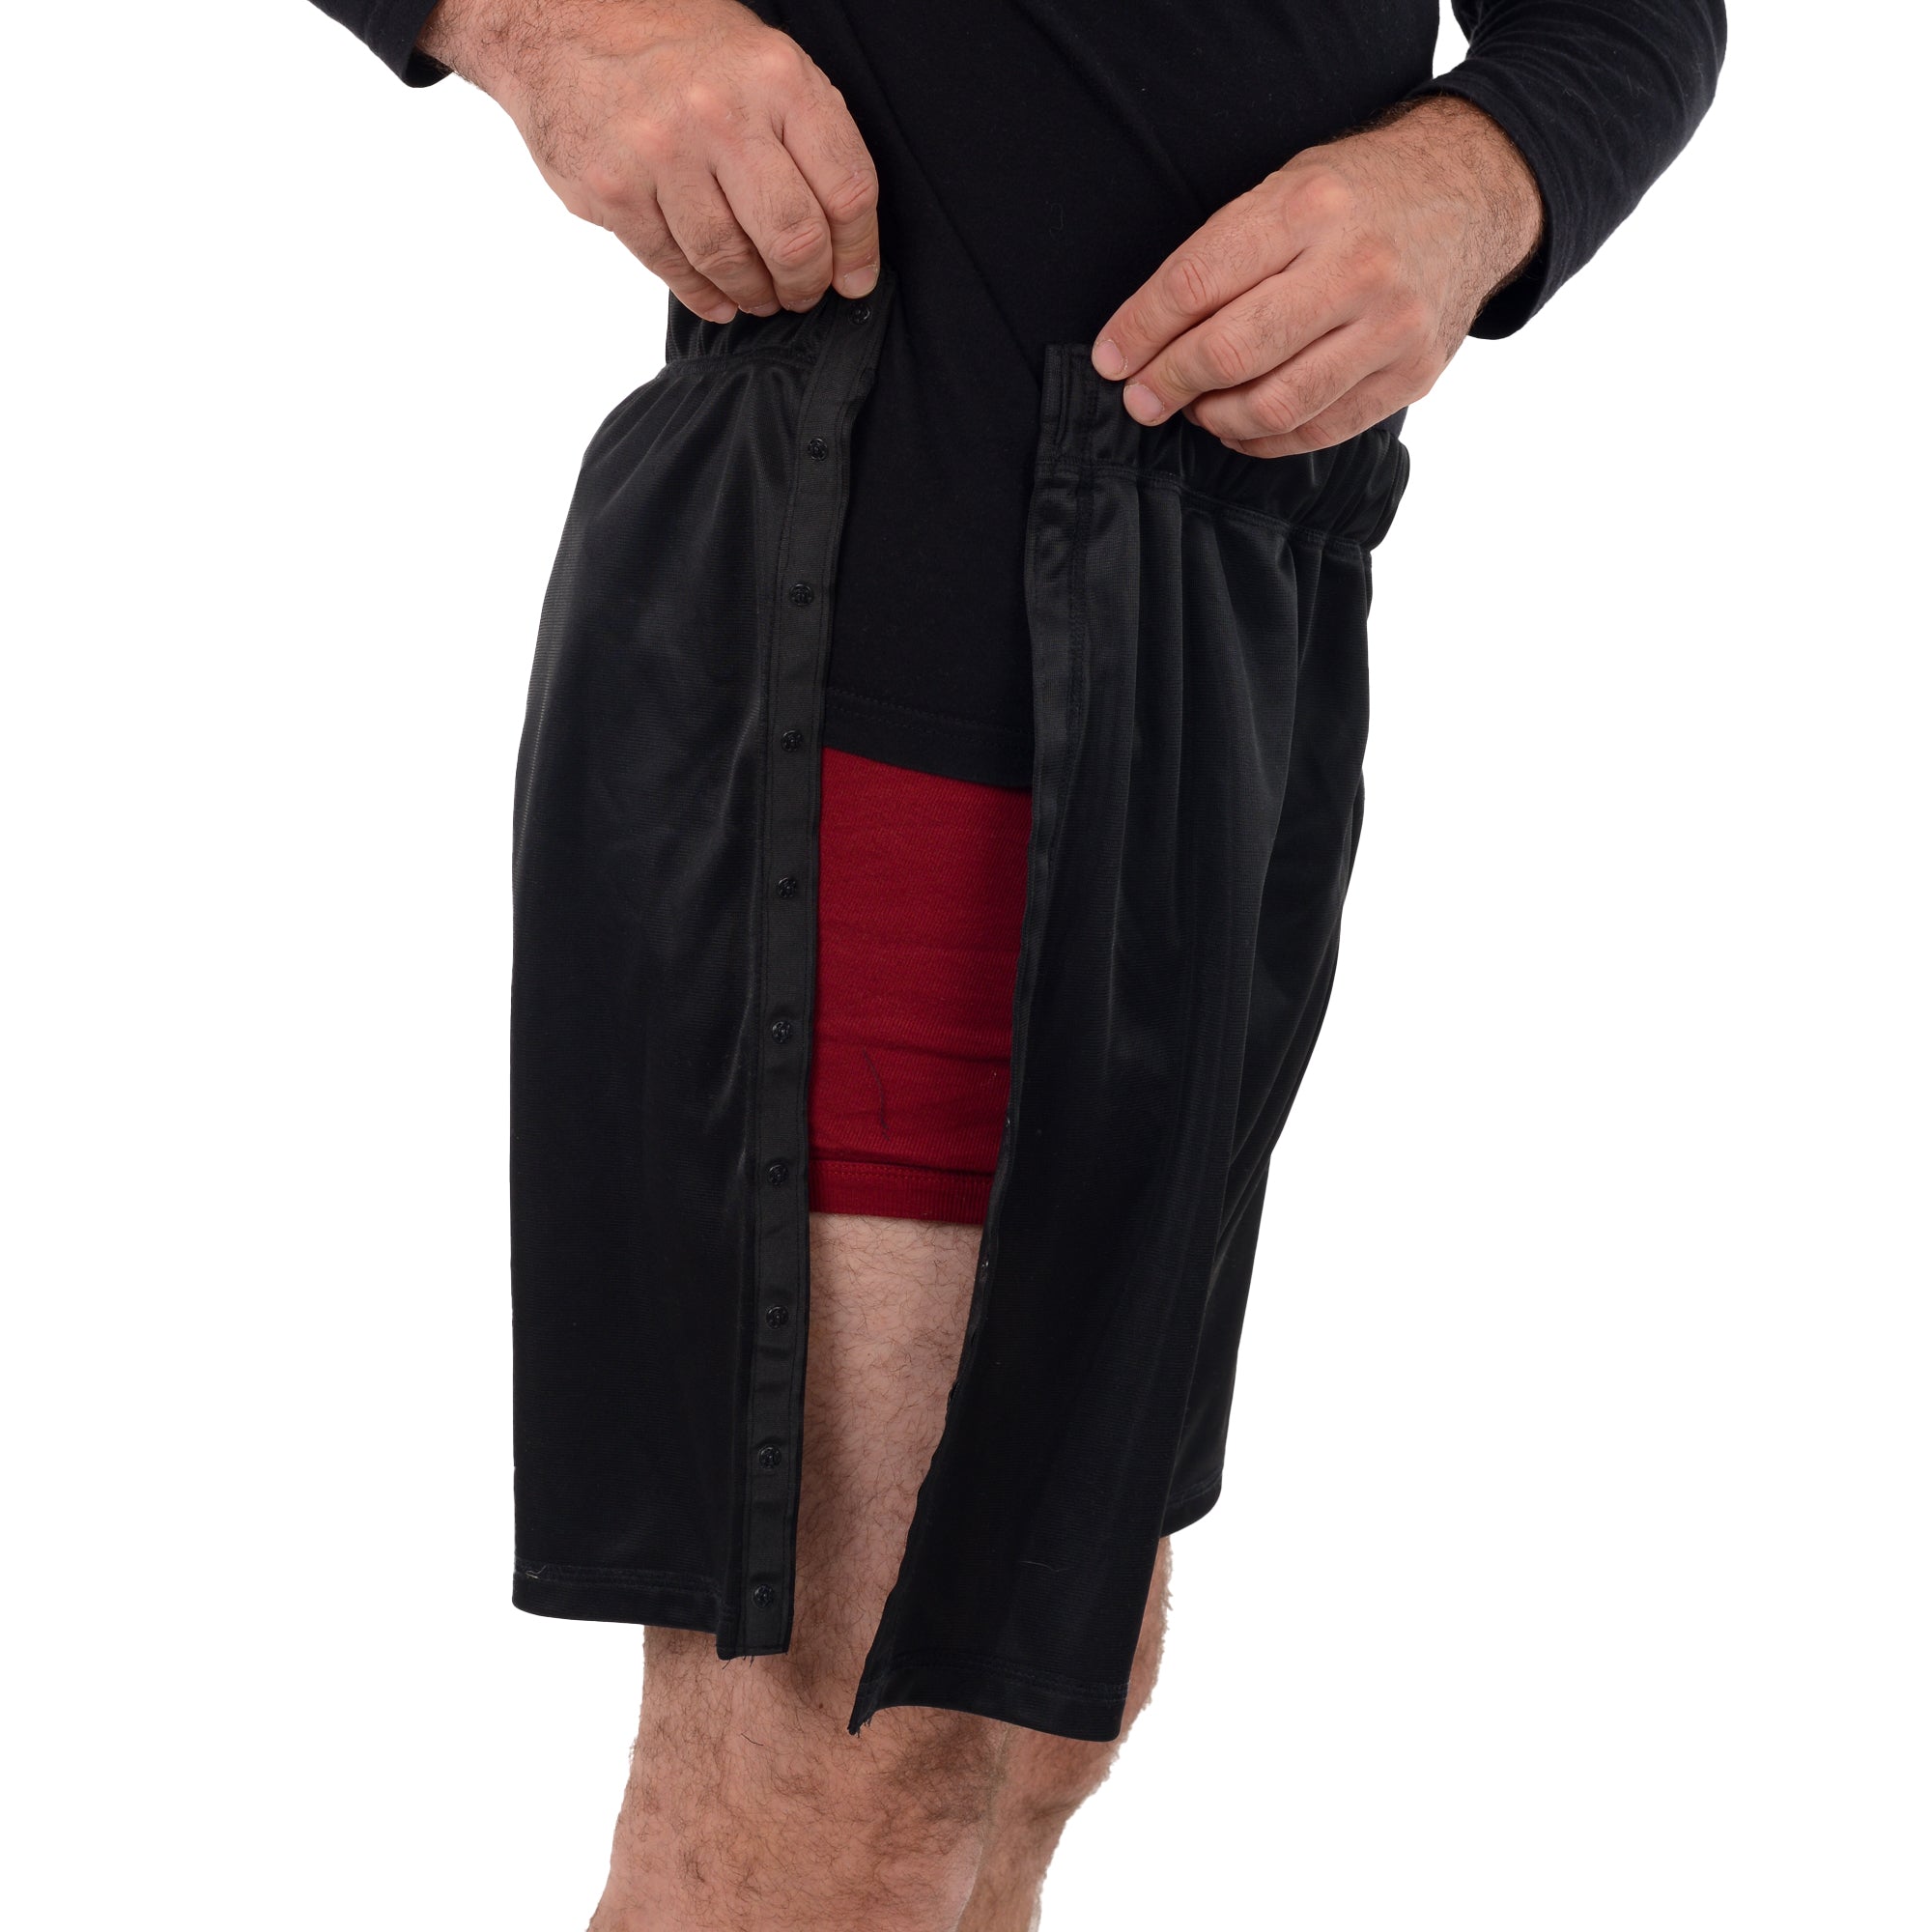 Post Medical Surgery Specialize Tearaway recovery shorts Pant for men